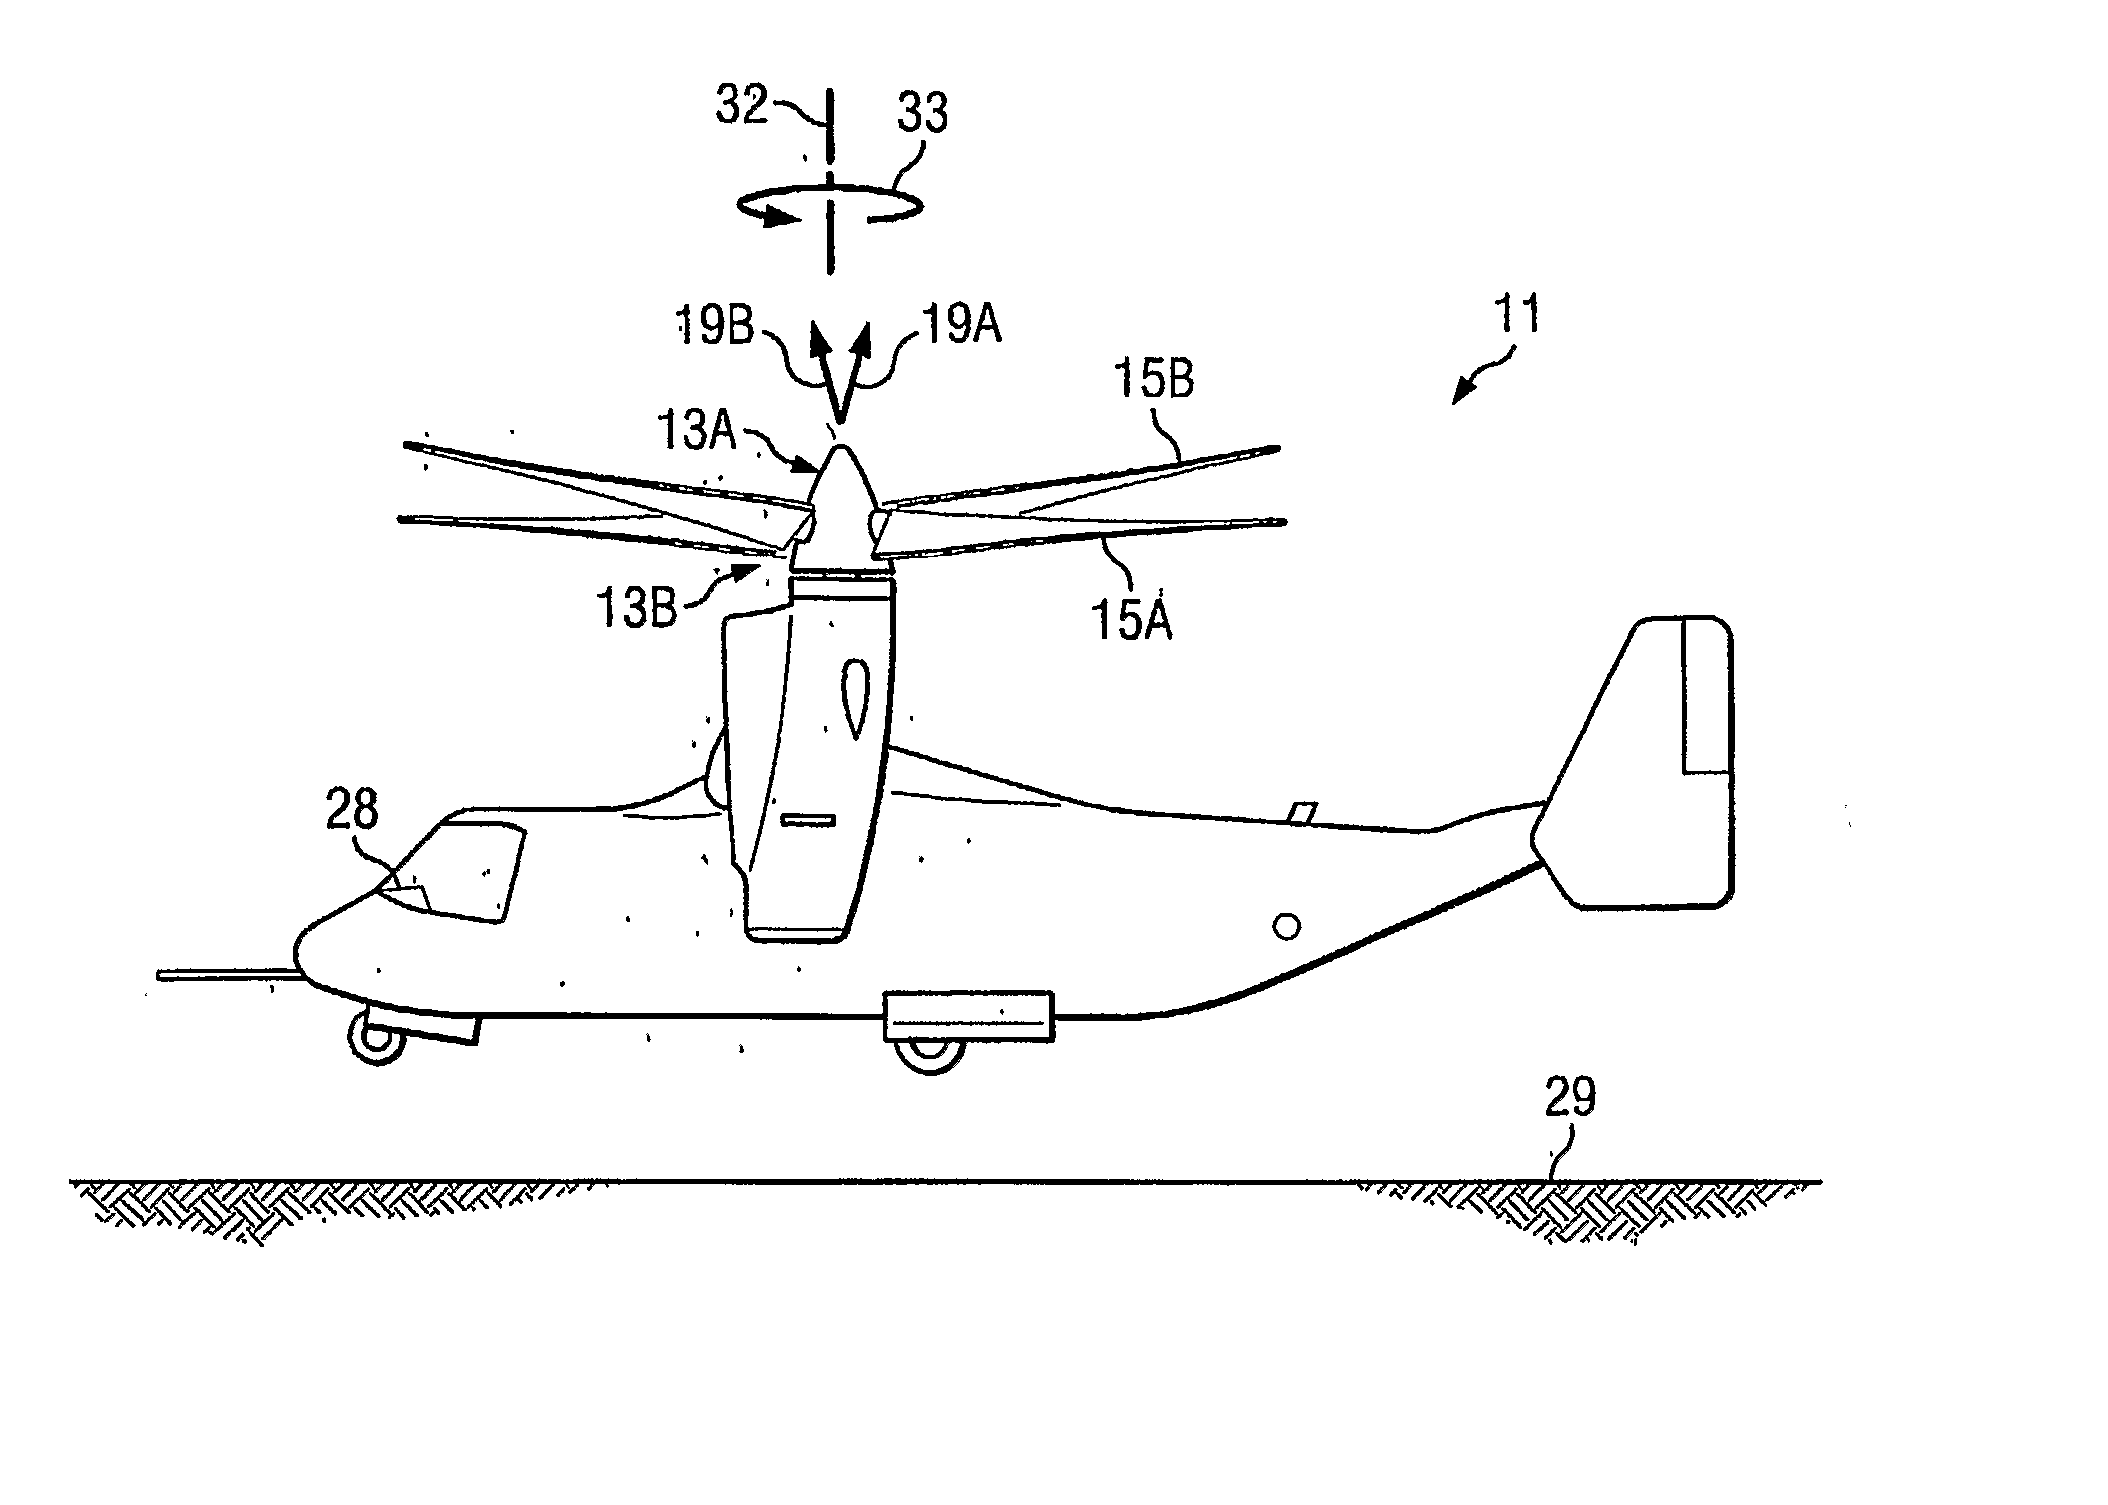 Method and Apparatus for Flight Control of Tiltrotor Aircraft